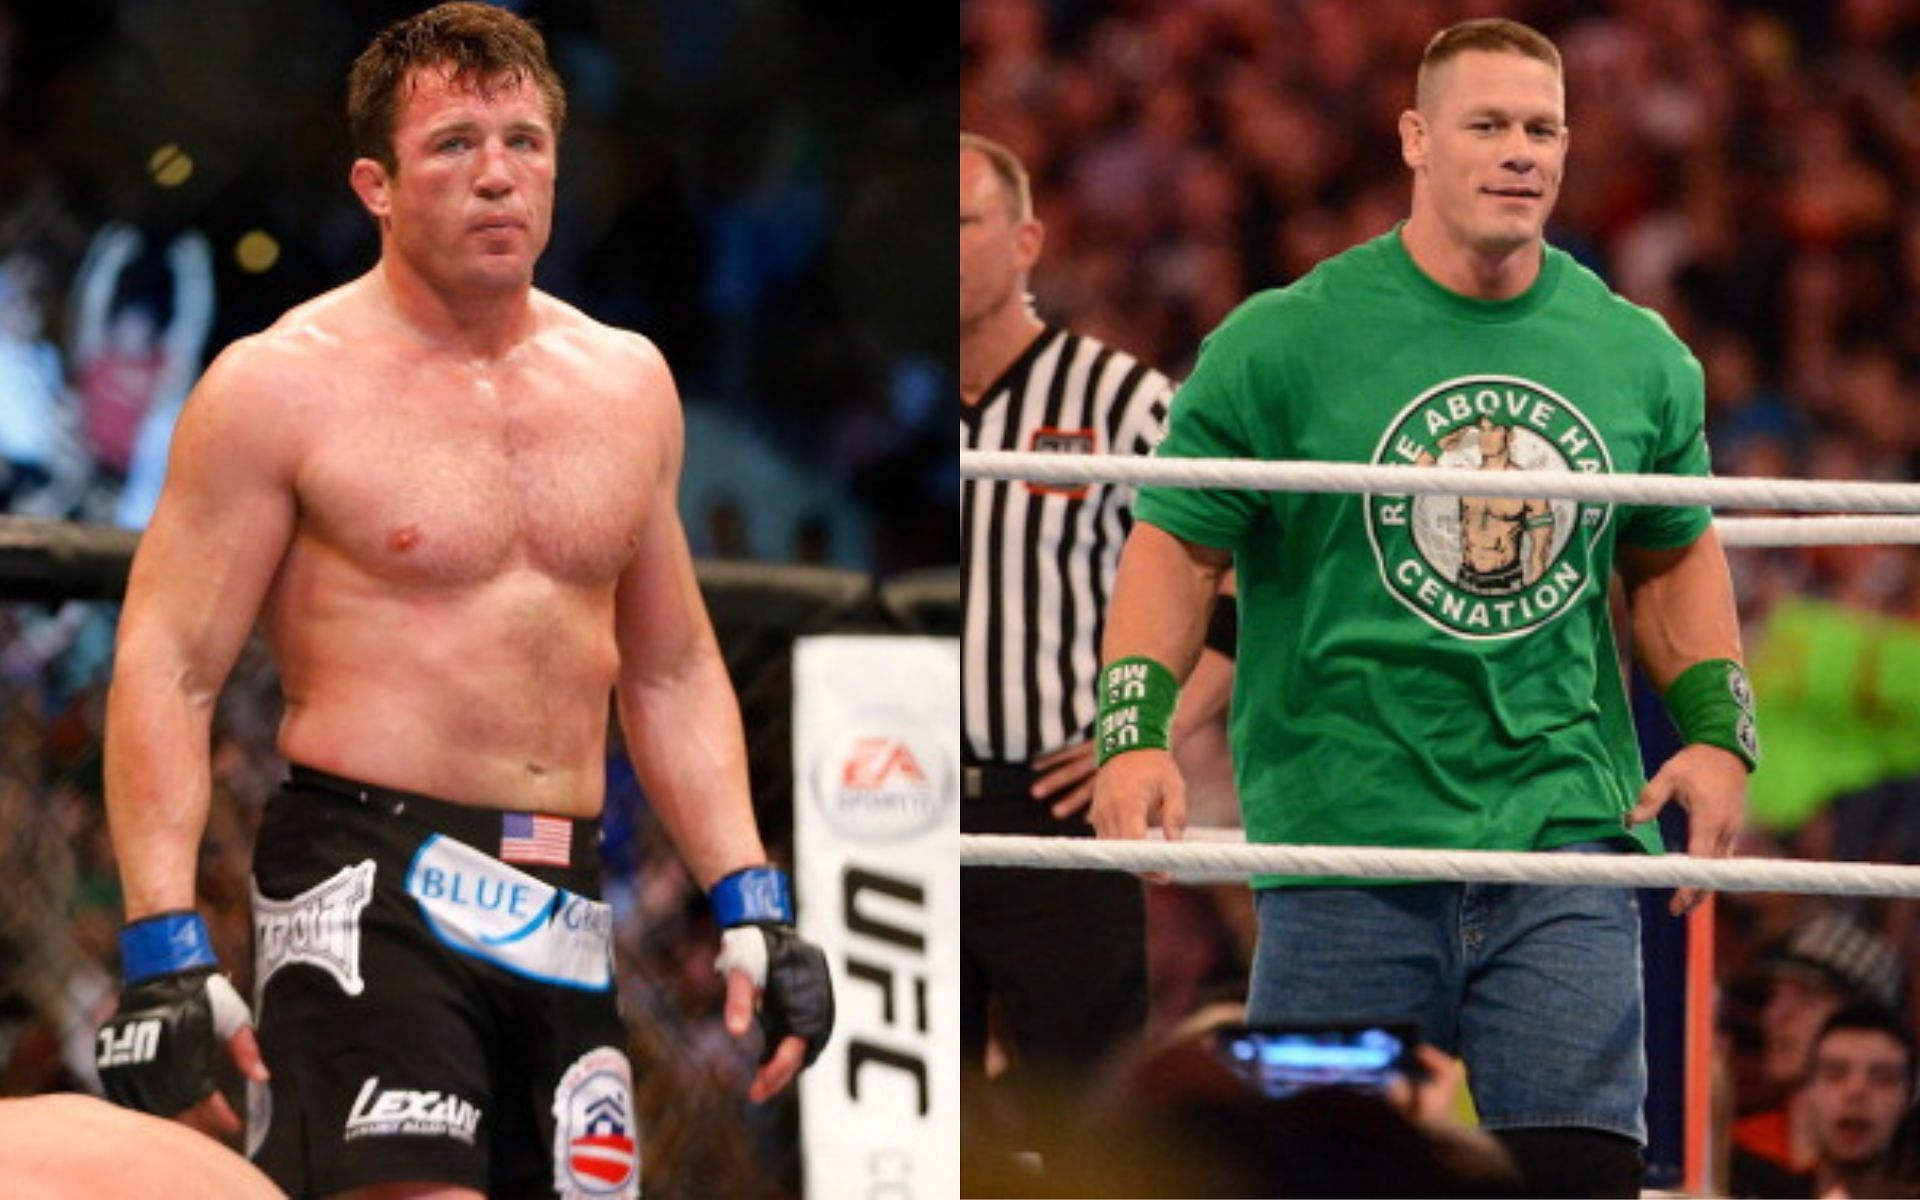 Chael Sonnen (left) and John Cena (right)(Images via Getty)